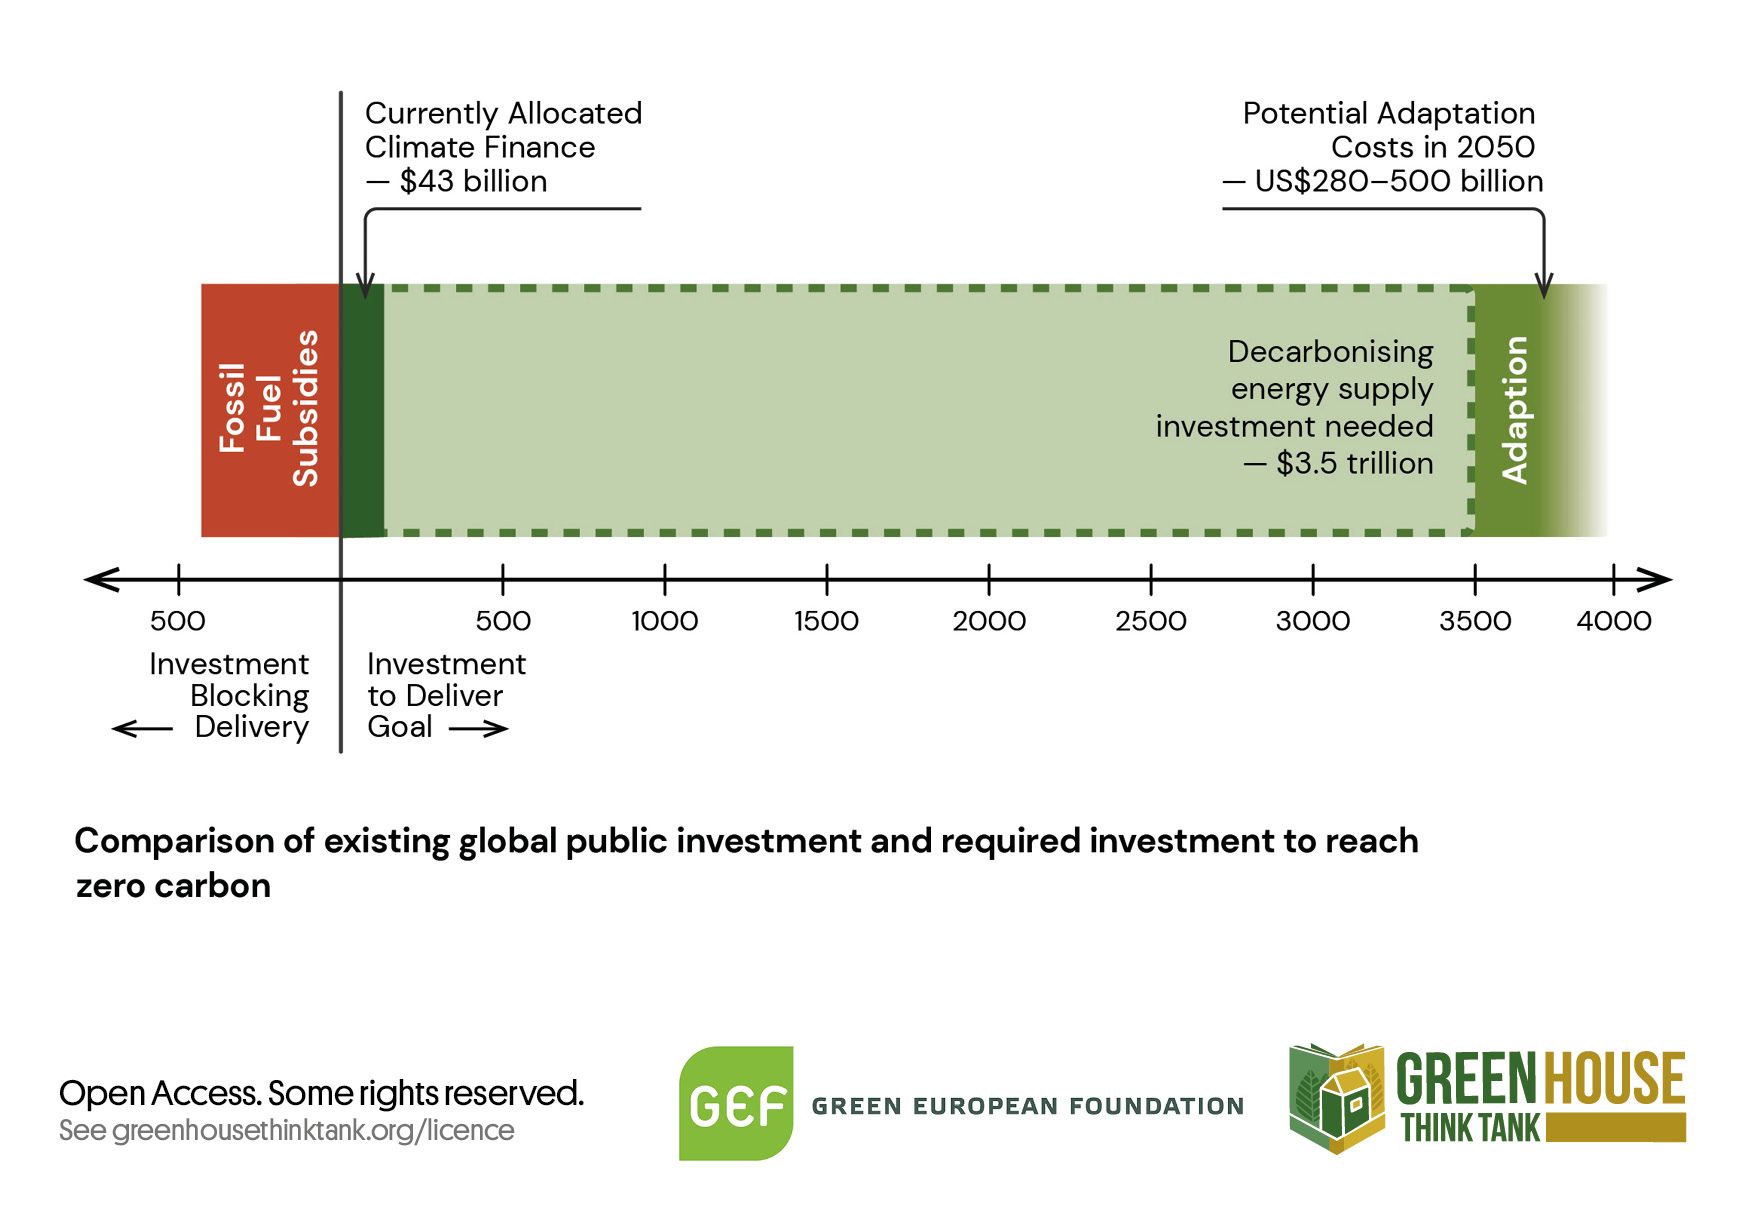 Diagram comparing the existing global public investment and required investment to reach zero carbon